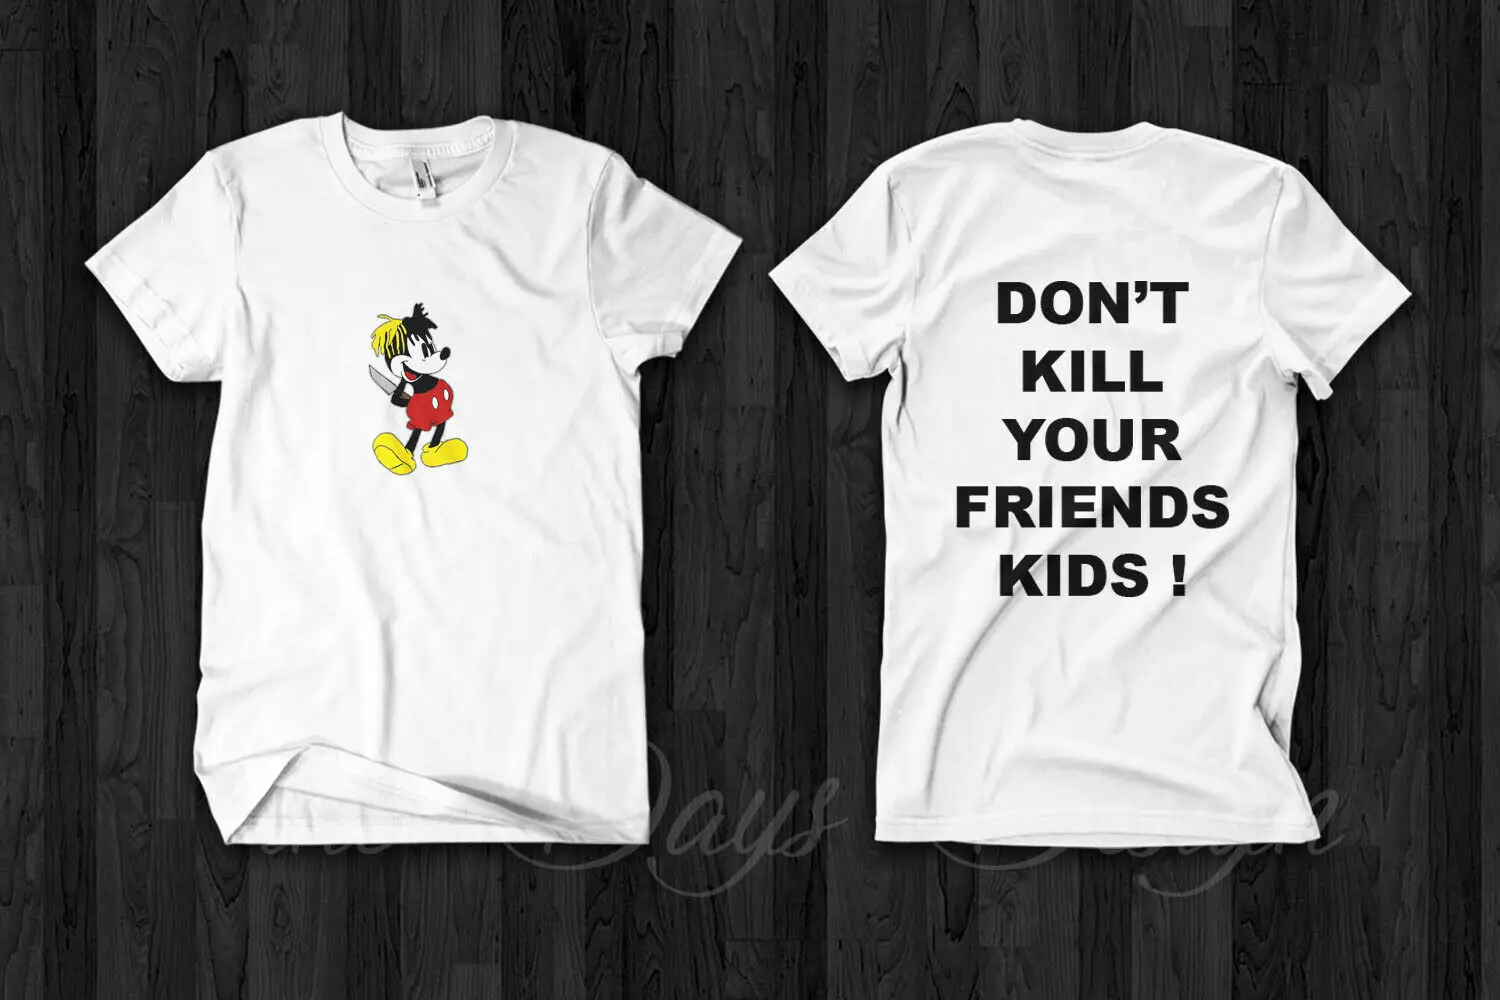 Донт френд. Dont Kill your friends Kids футболка. Don't Kill your friends Kids. Don't Kill your friends Kids худи. Футболка Kill your Family.